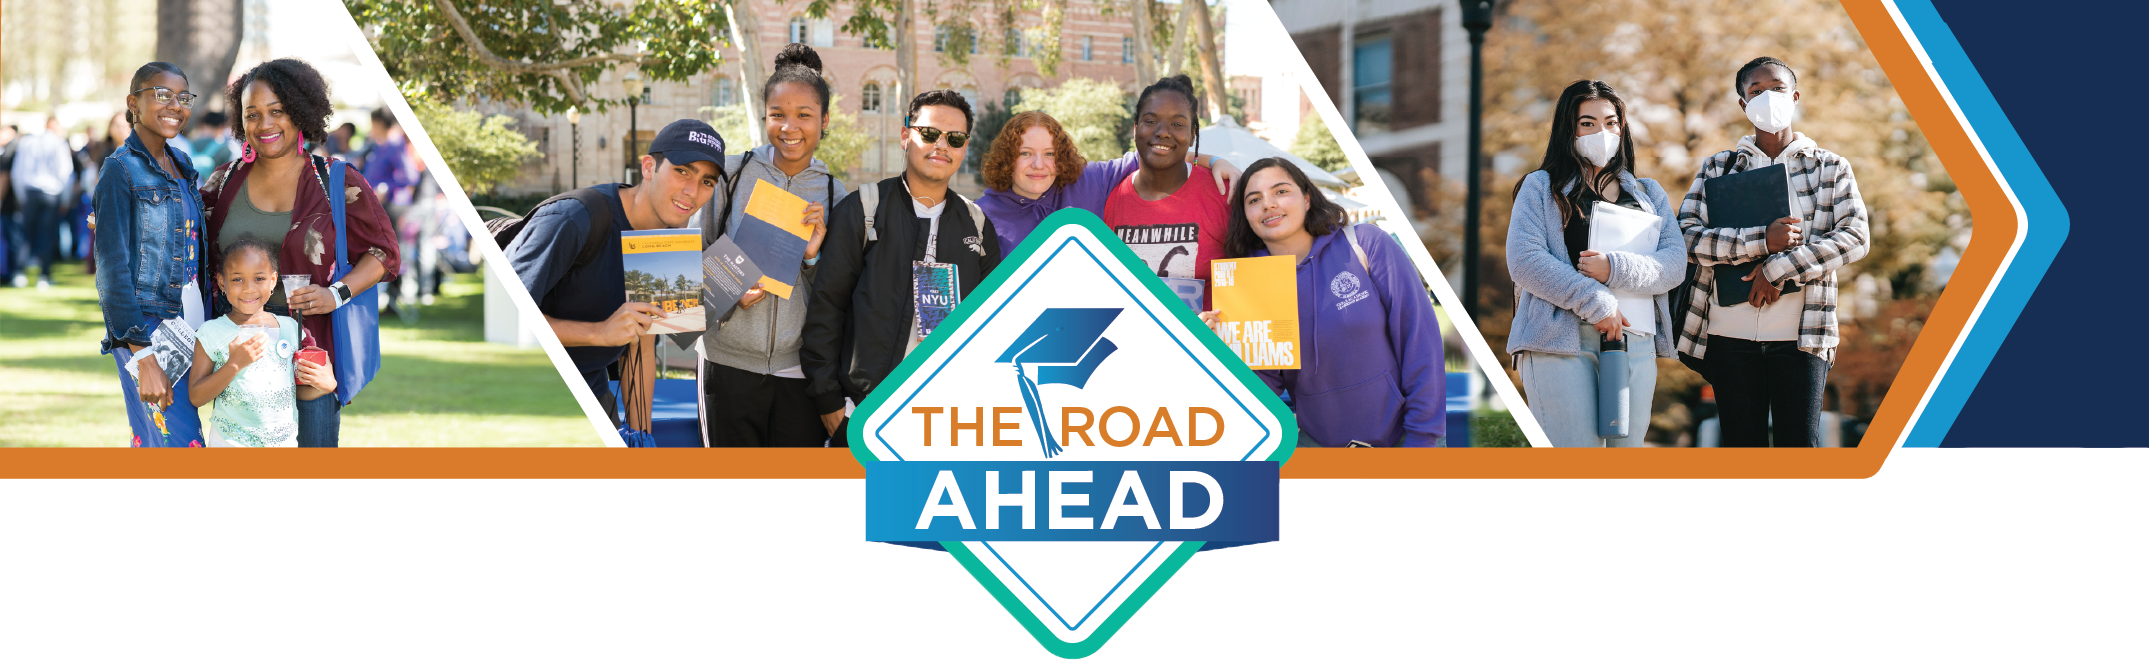 Help students prepare for the Road Ahead